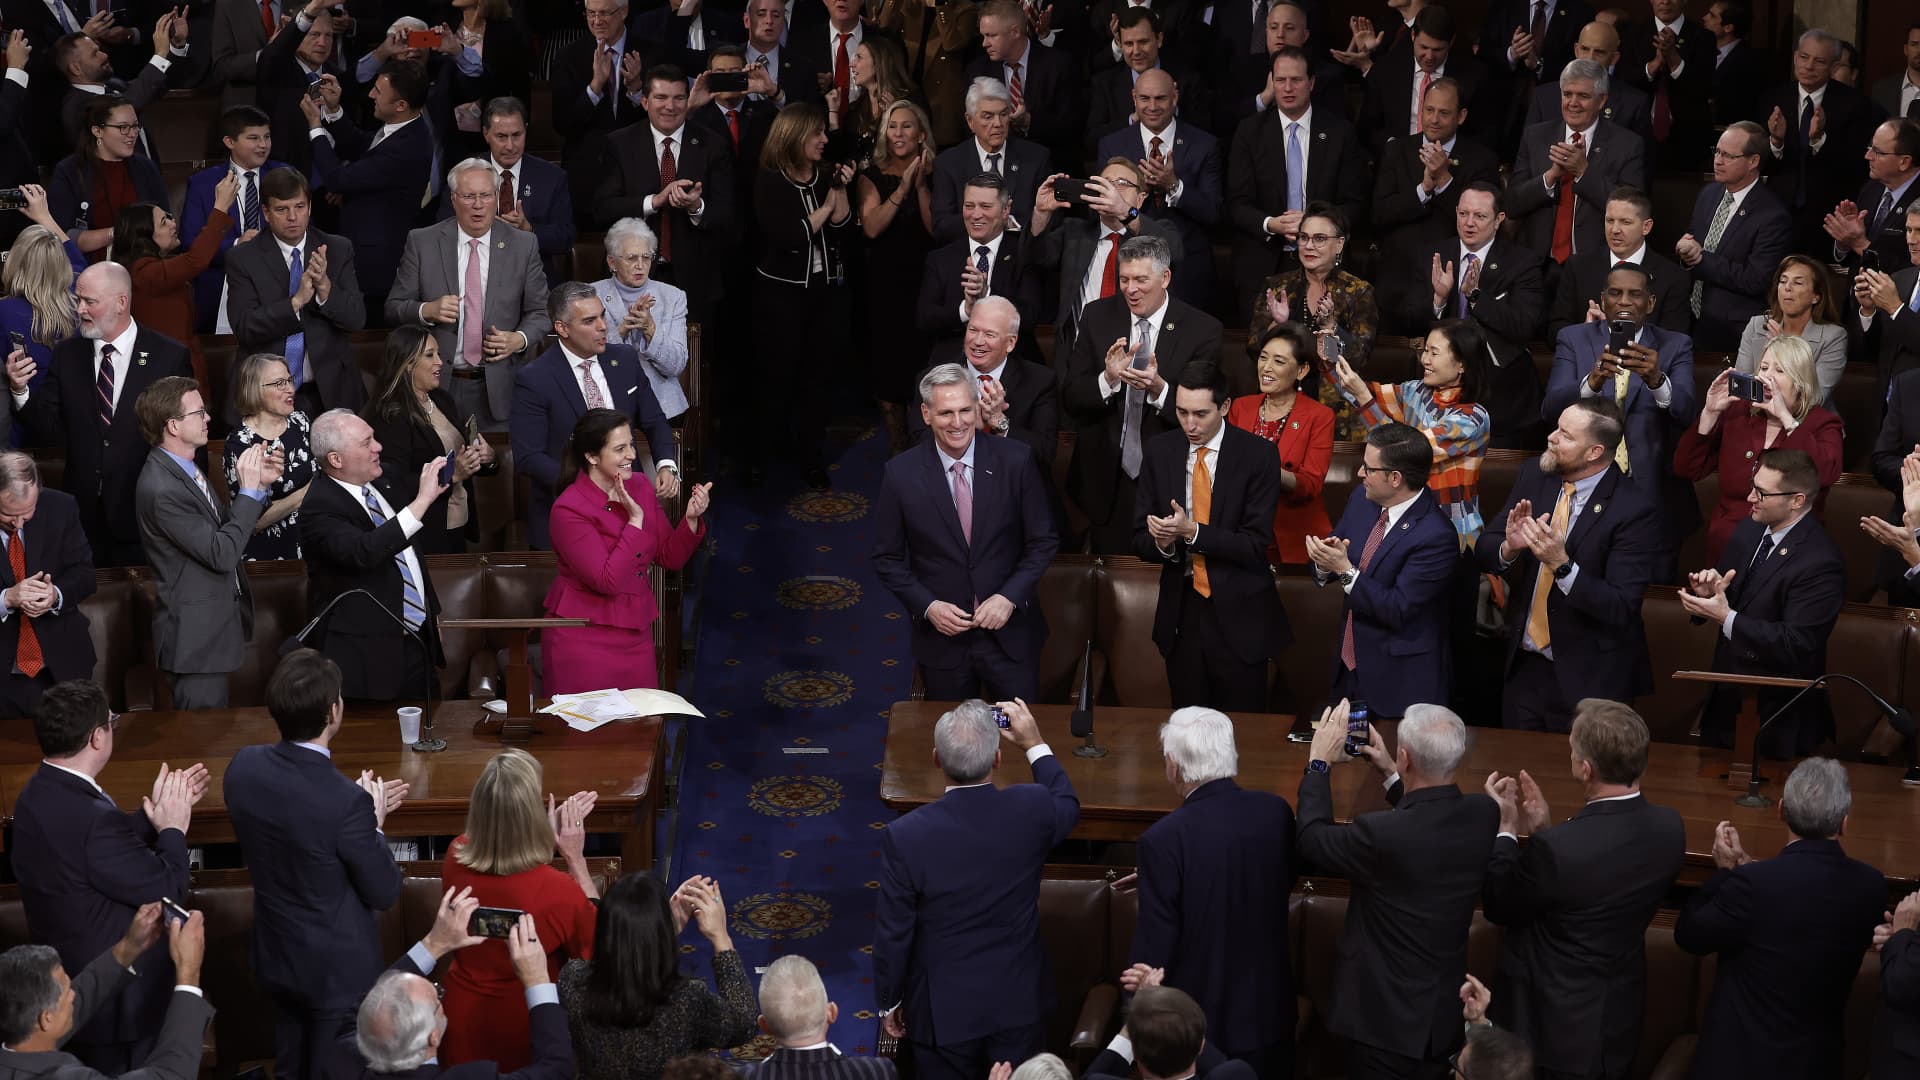 Republican members-elect celebrate as House Republican Leader Kevin McCarthy (R-CA) is elected Speaker of the House in the House Chamber at the U.S. Capitol Building on January 07, 2023 in Washington, DC.